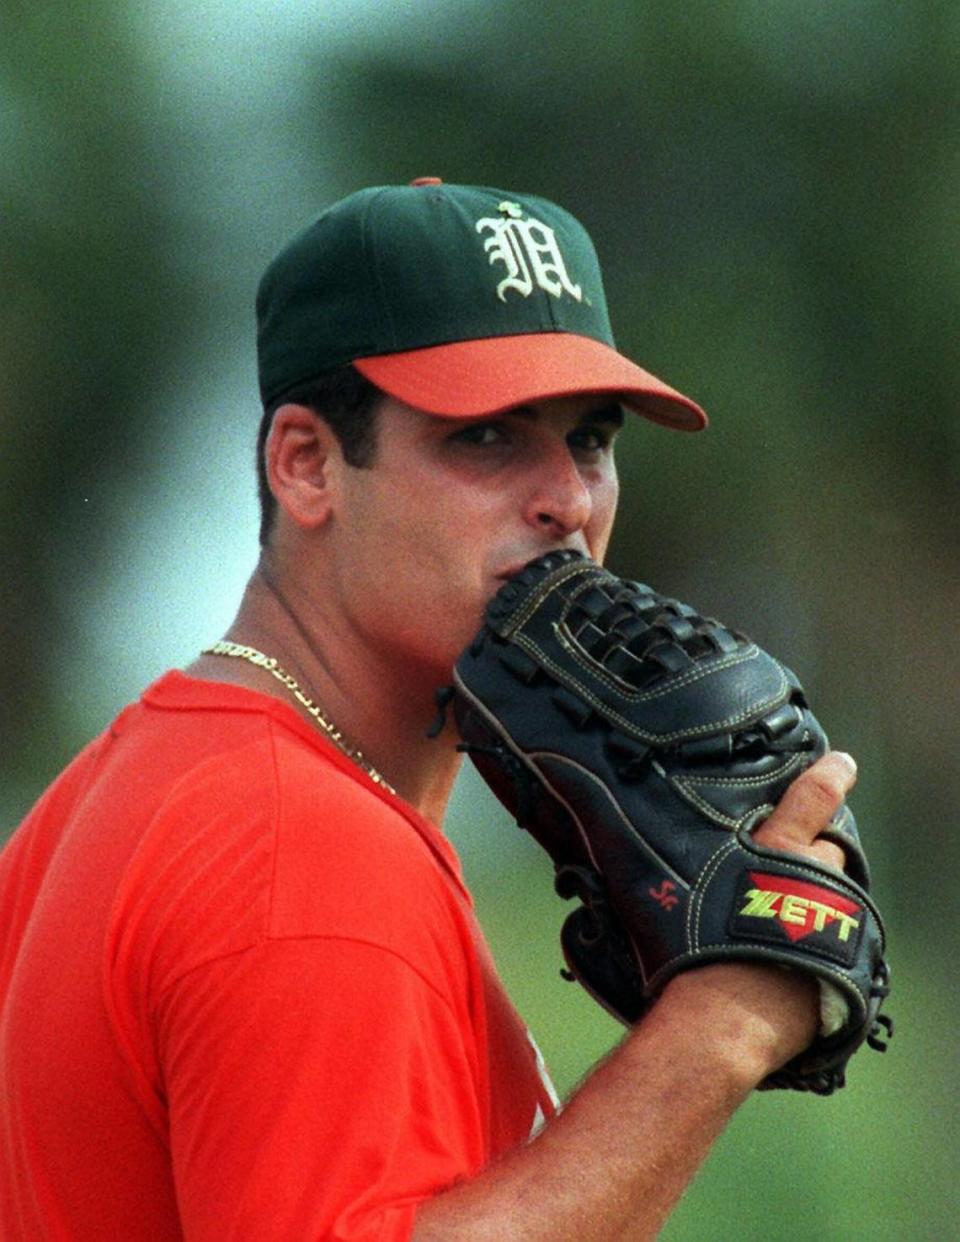 J.D. Arteaga takes a stare from the mound during practice at Mark Light as they prepare for the College World Series in Omaha. Photo by C.W. GRIFFIN-HERALD STAFF-5/28/97